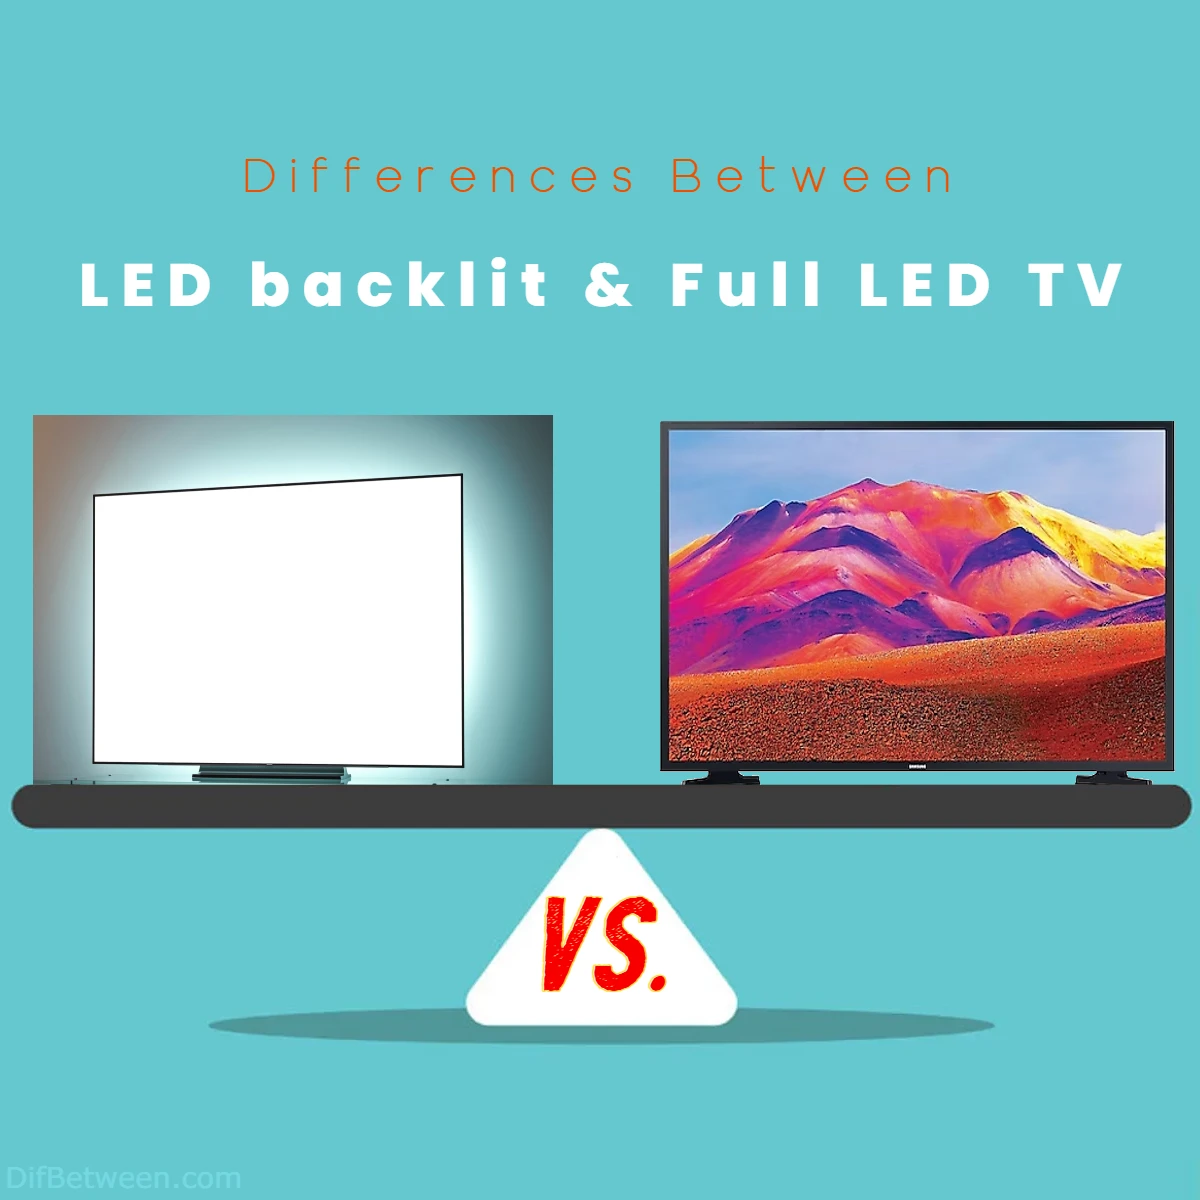 Difference Between LED Backlit TV and Full LED TV